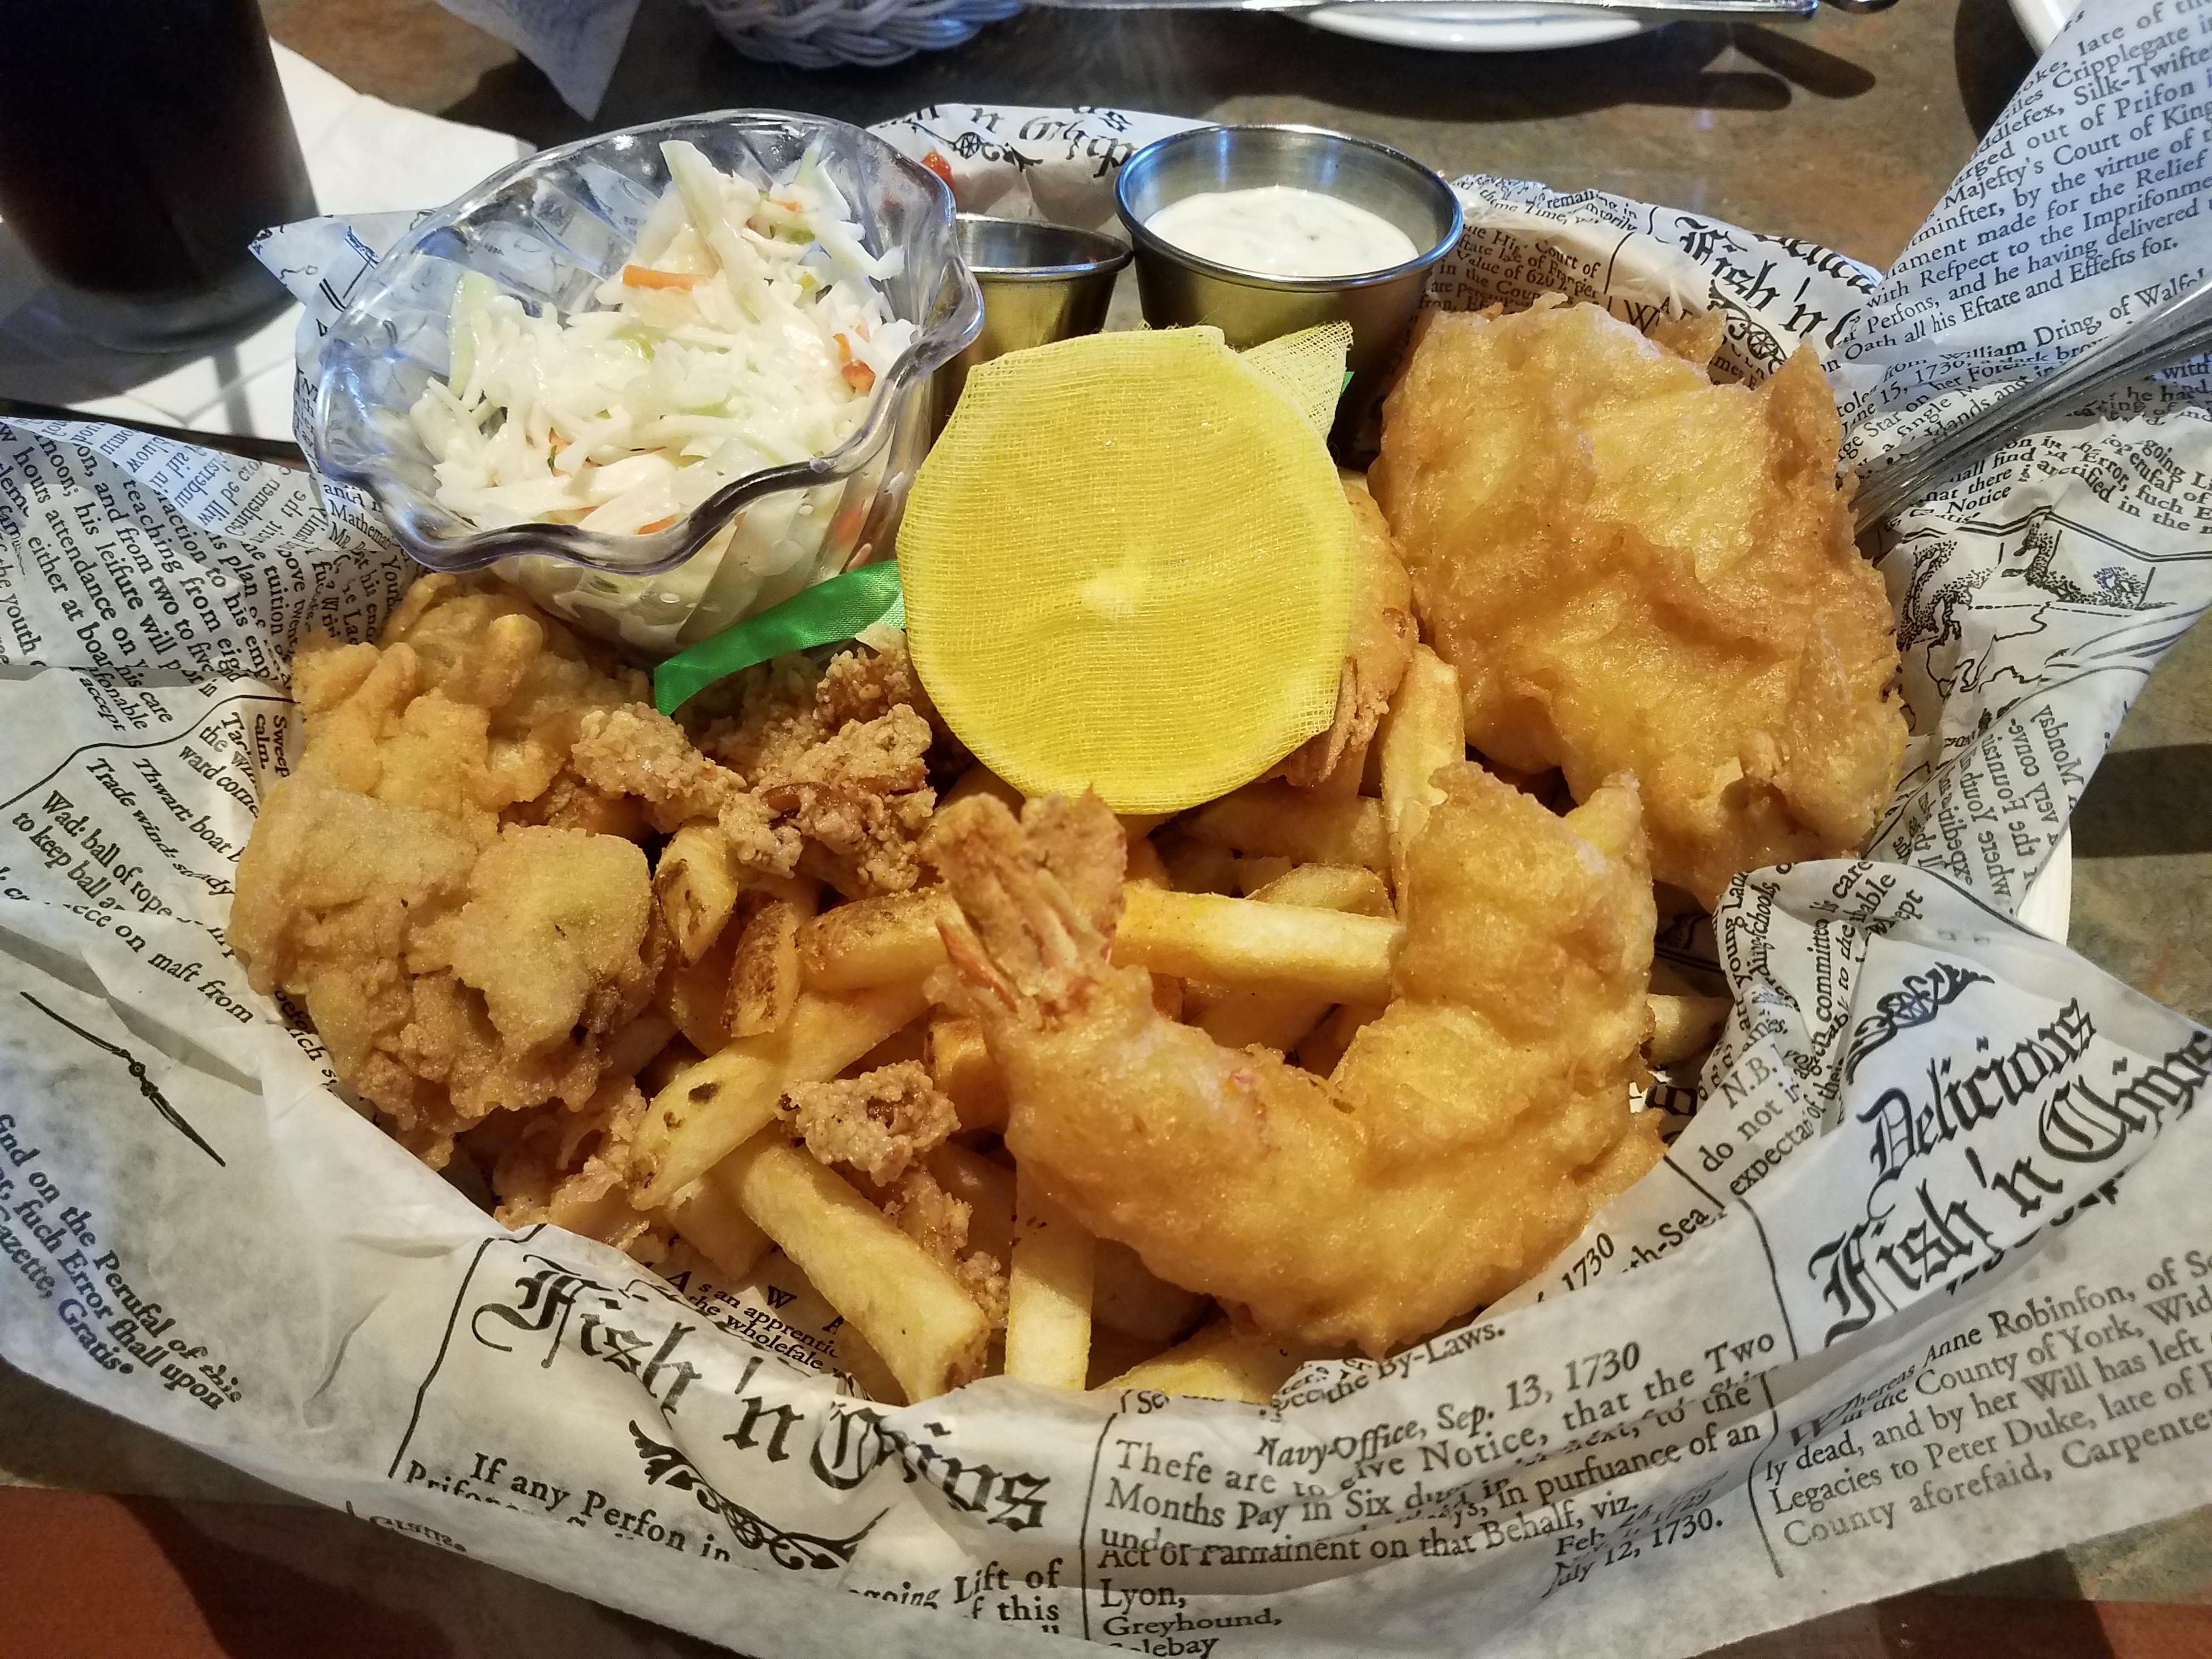 Fisherman's Basket at Lombard's Seafood Grille in Universal Studios Orlando by unofficialuniversal.com